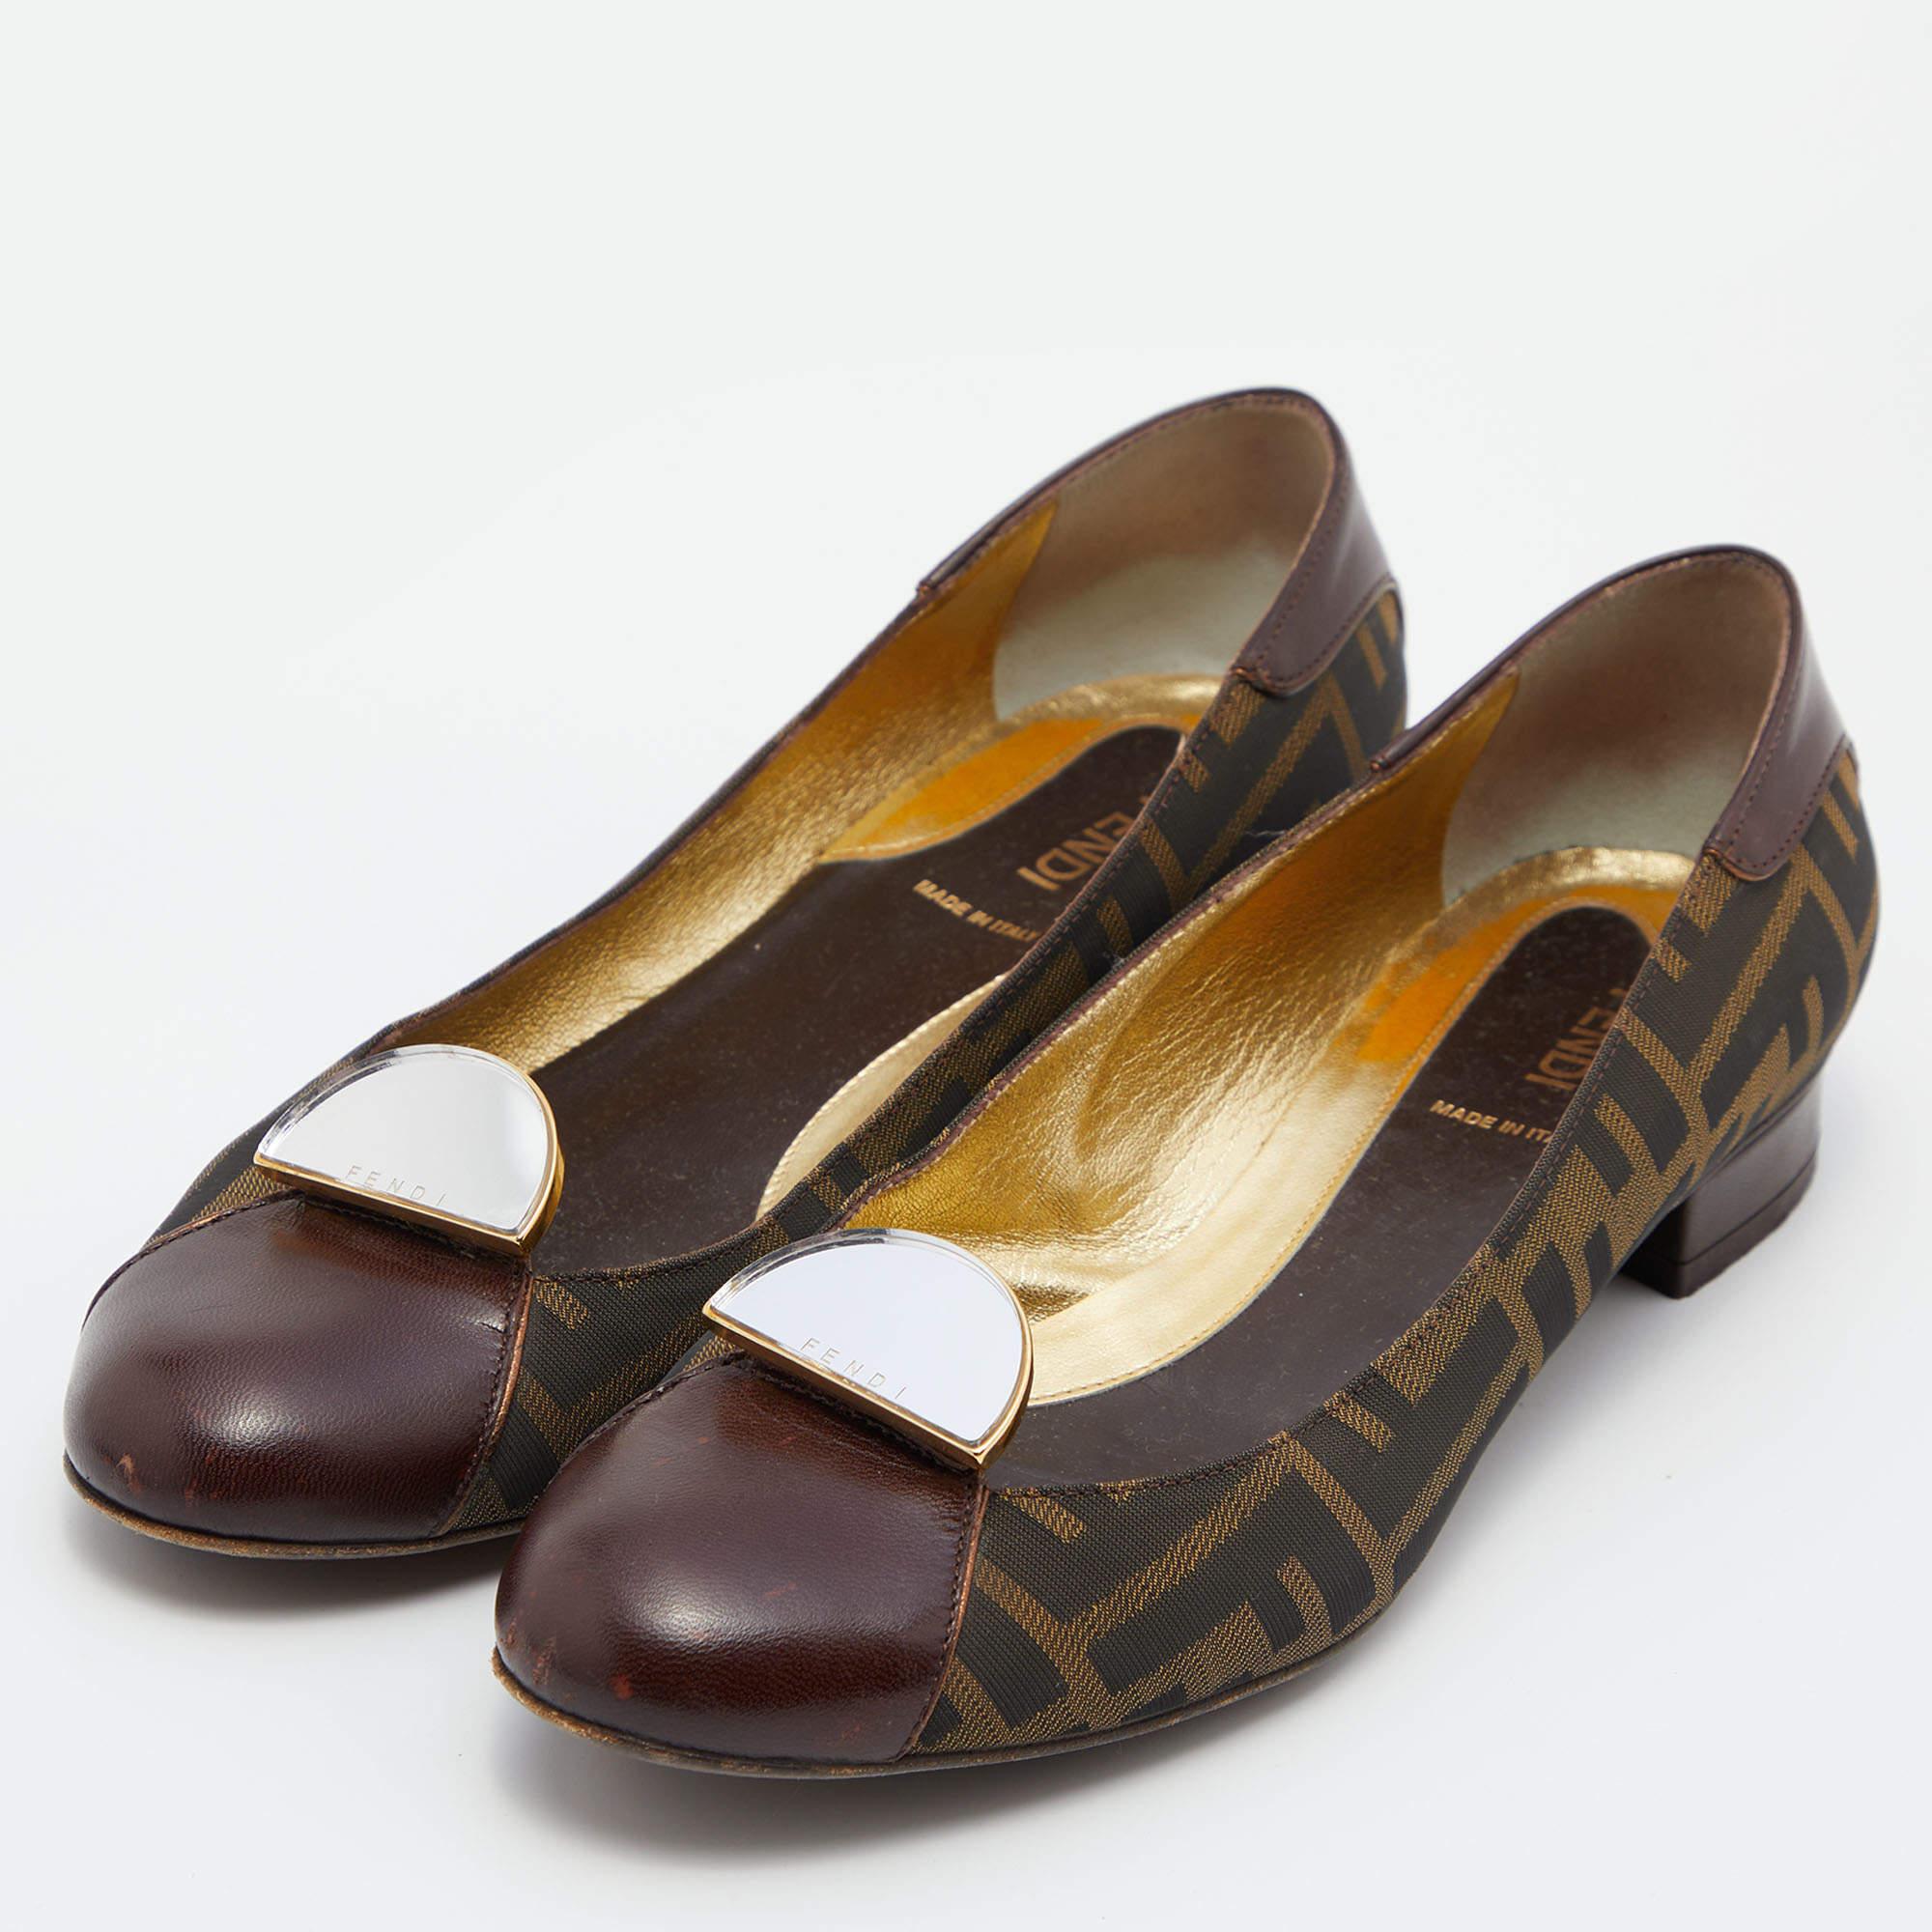 Women's Fendi Brown/Black Zucca Canvas and Leather Cap Toe Flats Size 38.5